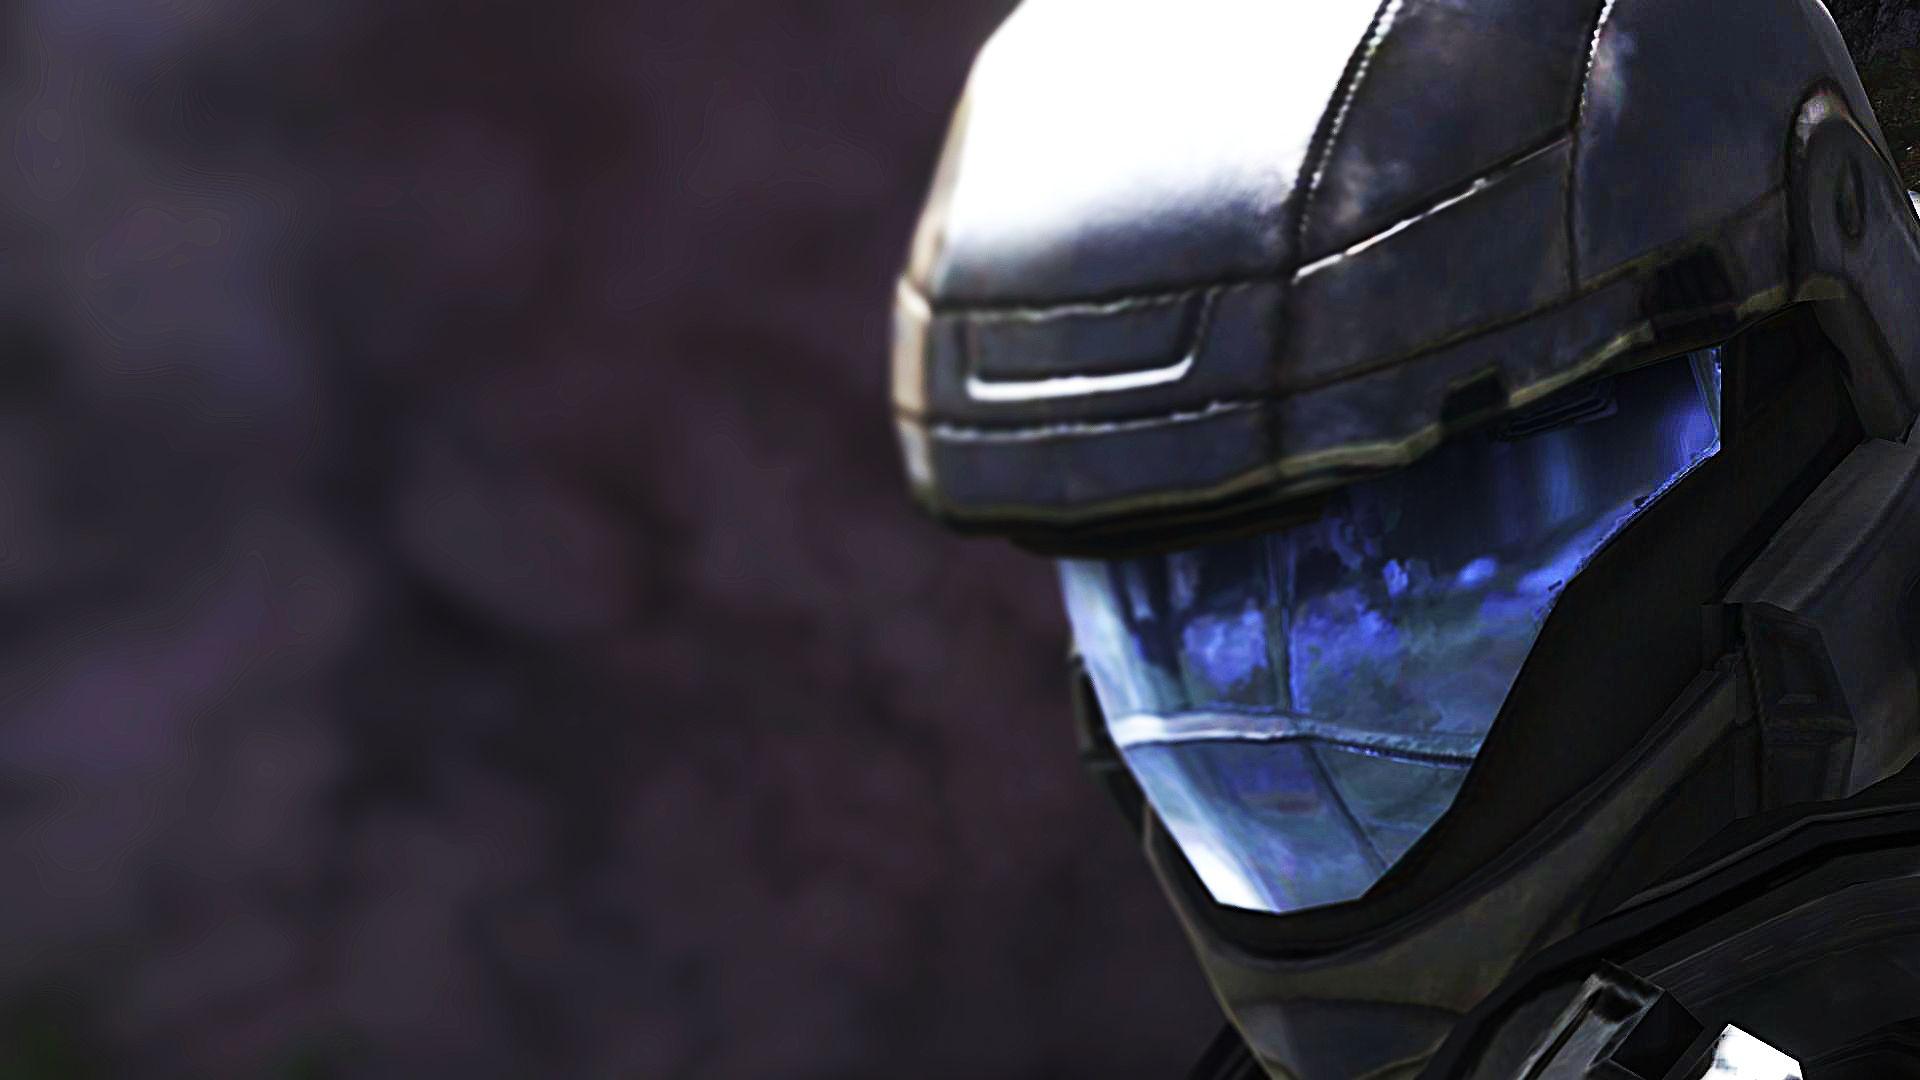 Download the Halo Cinematic Wallpaper, Halo Cinematic iPhone